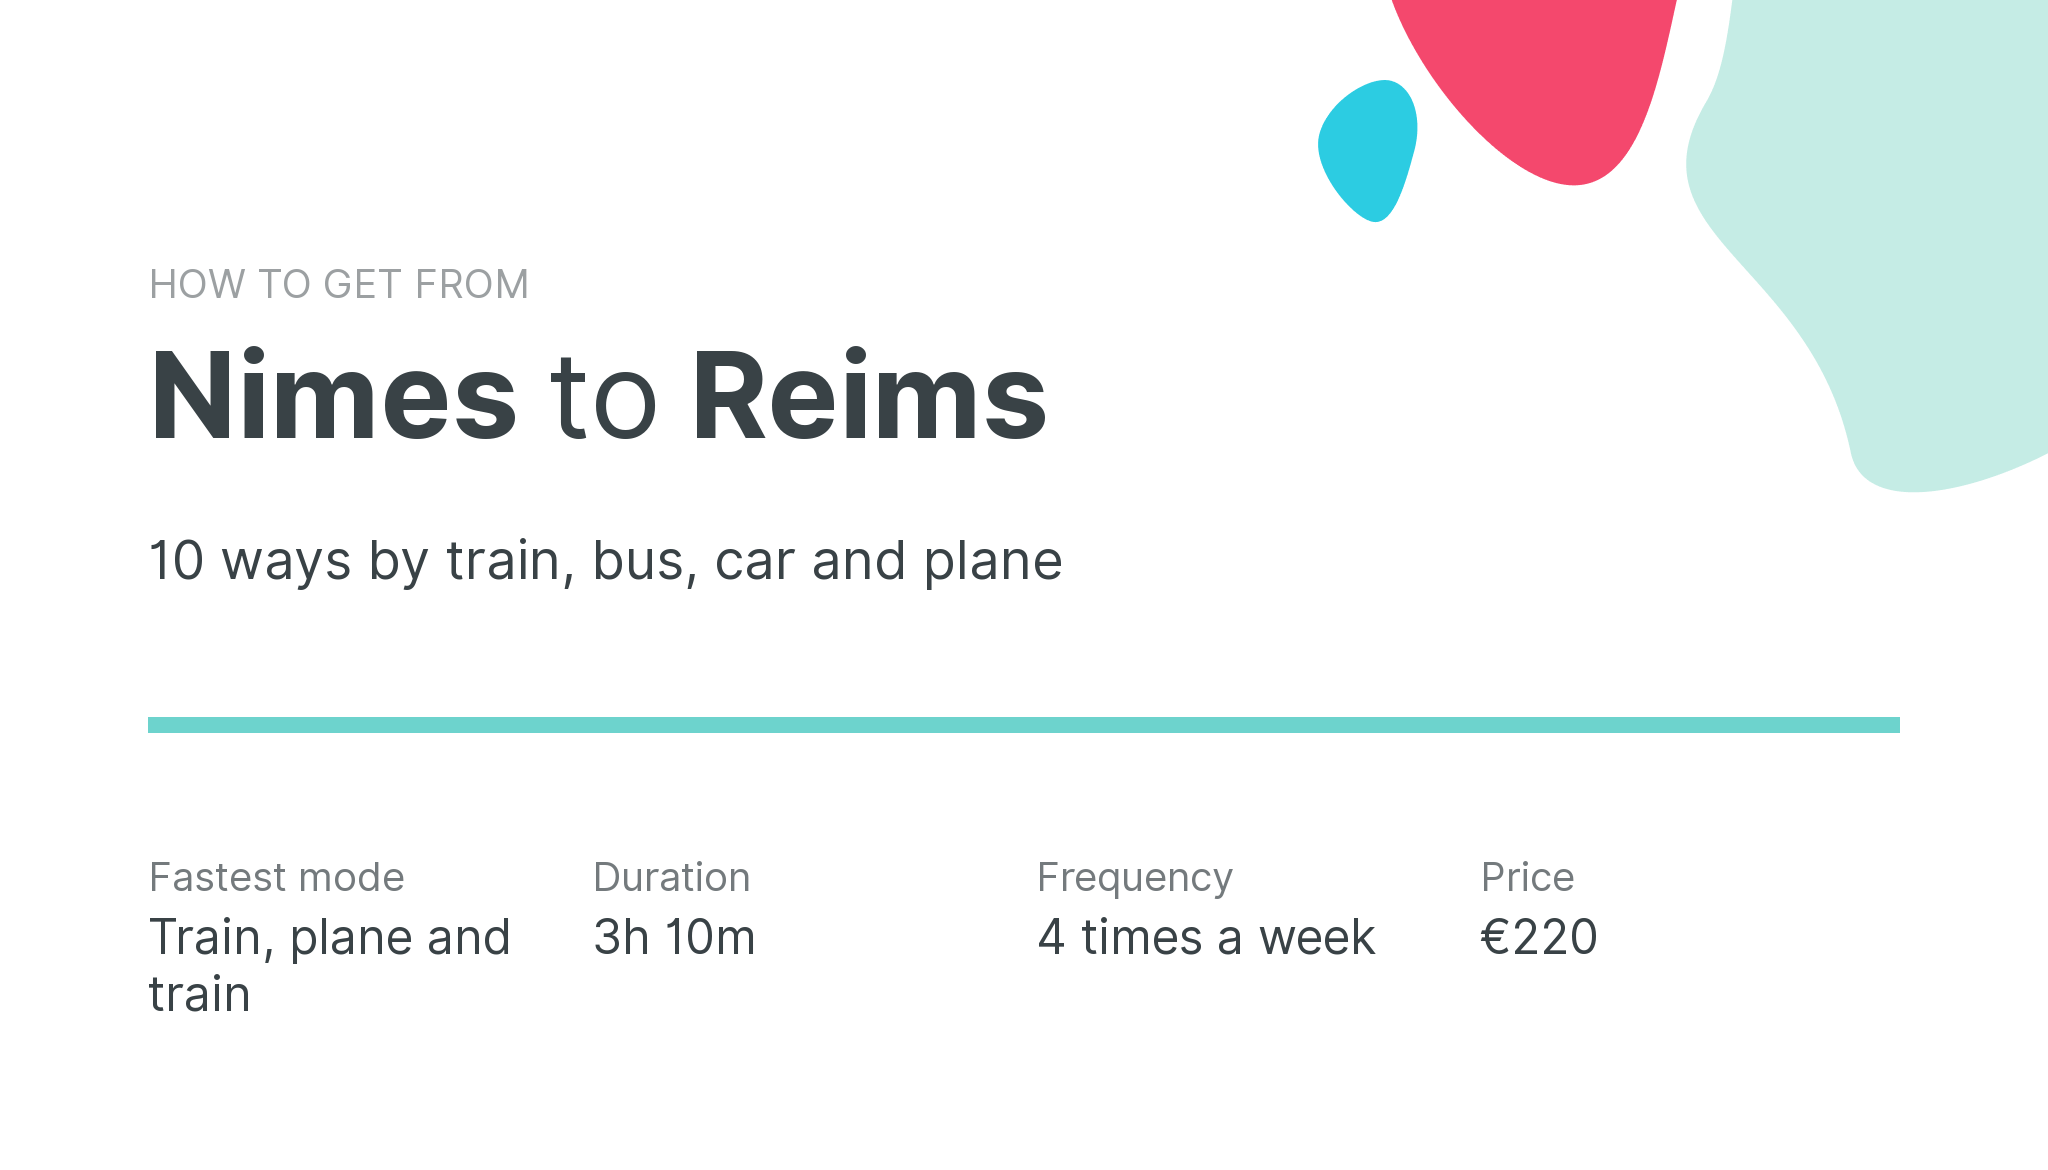 How do I get from Nimes to Reims